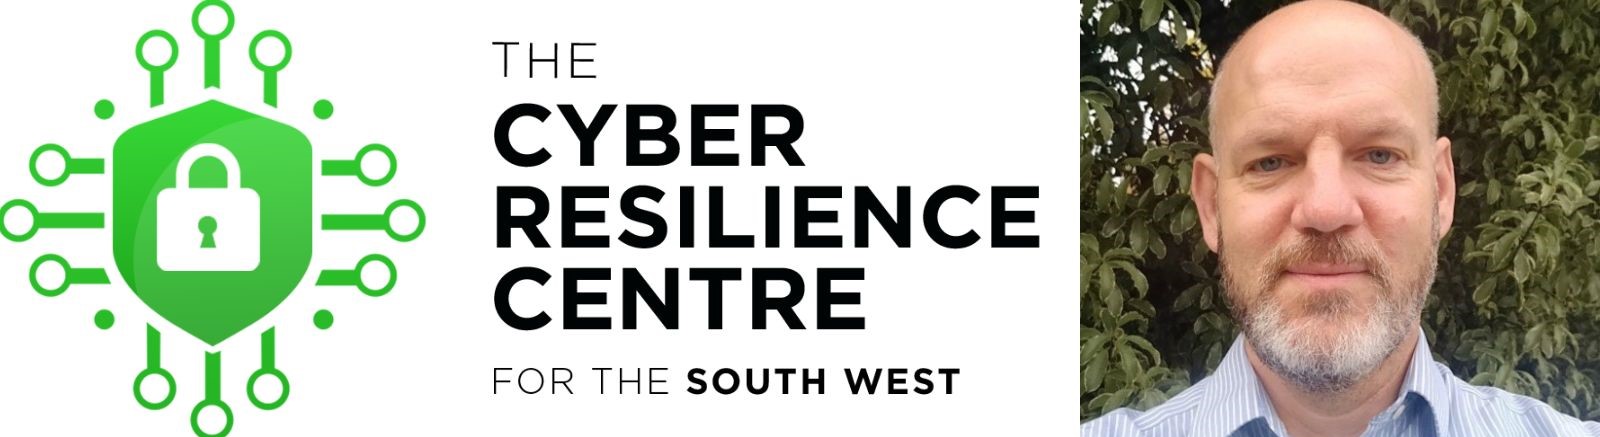 Cyber Resilience Centre logo and an image of speaker Mark Moore. Mark is a white man in his 40s with a bald head and grey beard